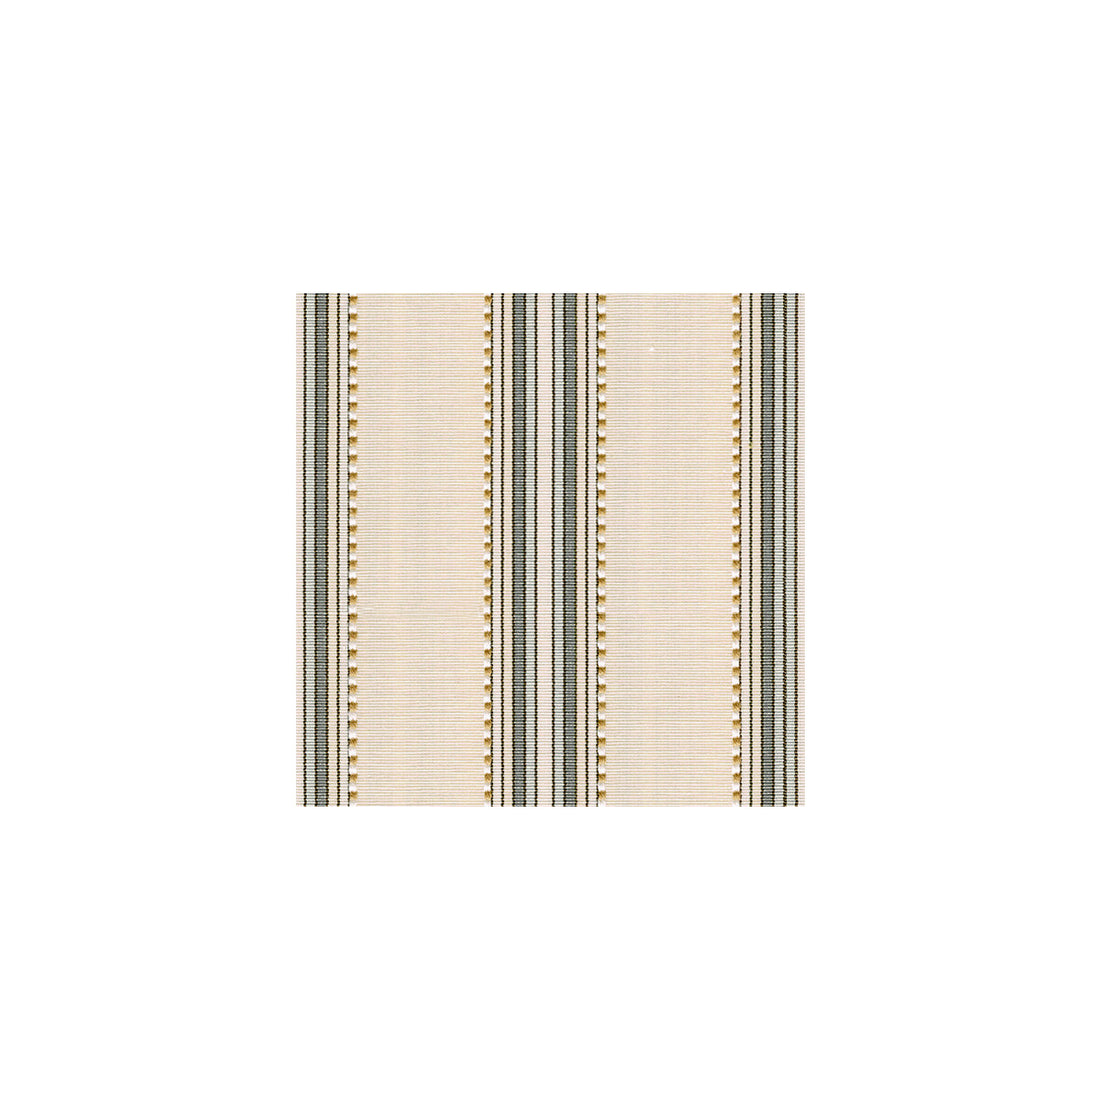 Sarala fabric in stone color - pattern 31235.16.0 - by Kravet Basics in the The Echo Design collection